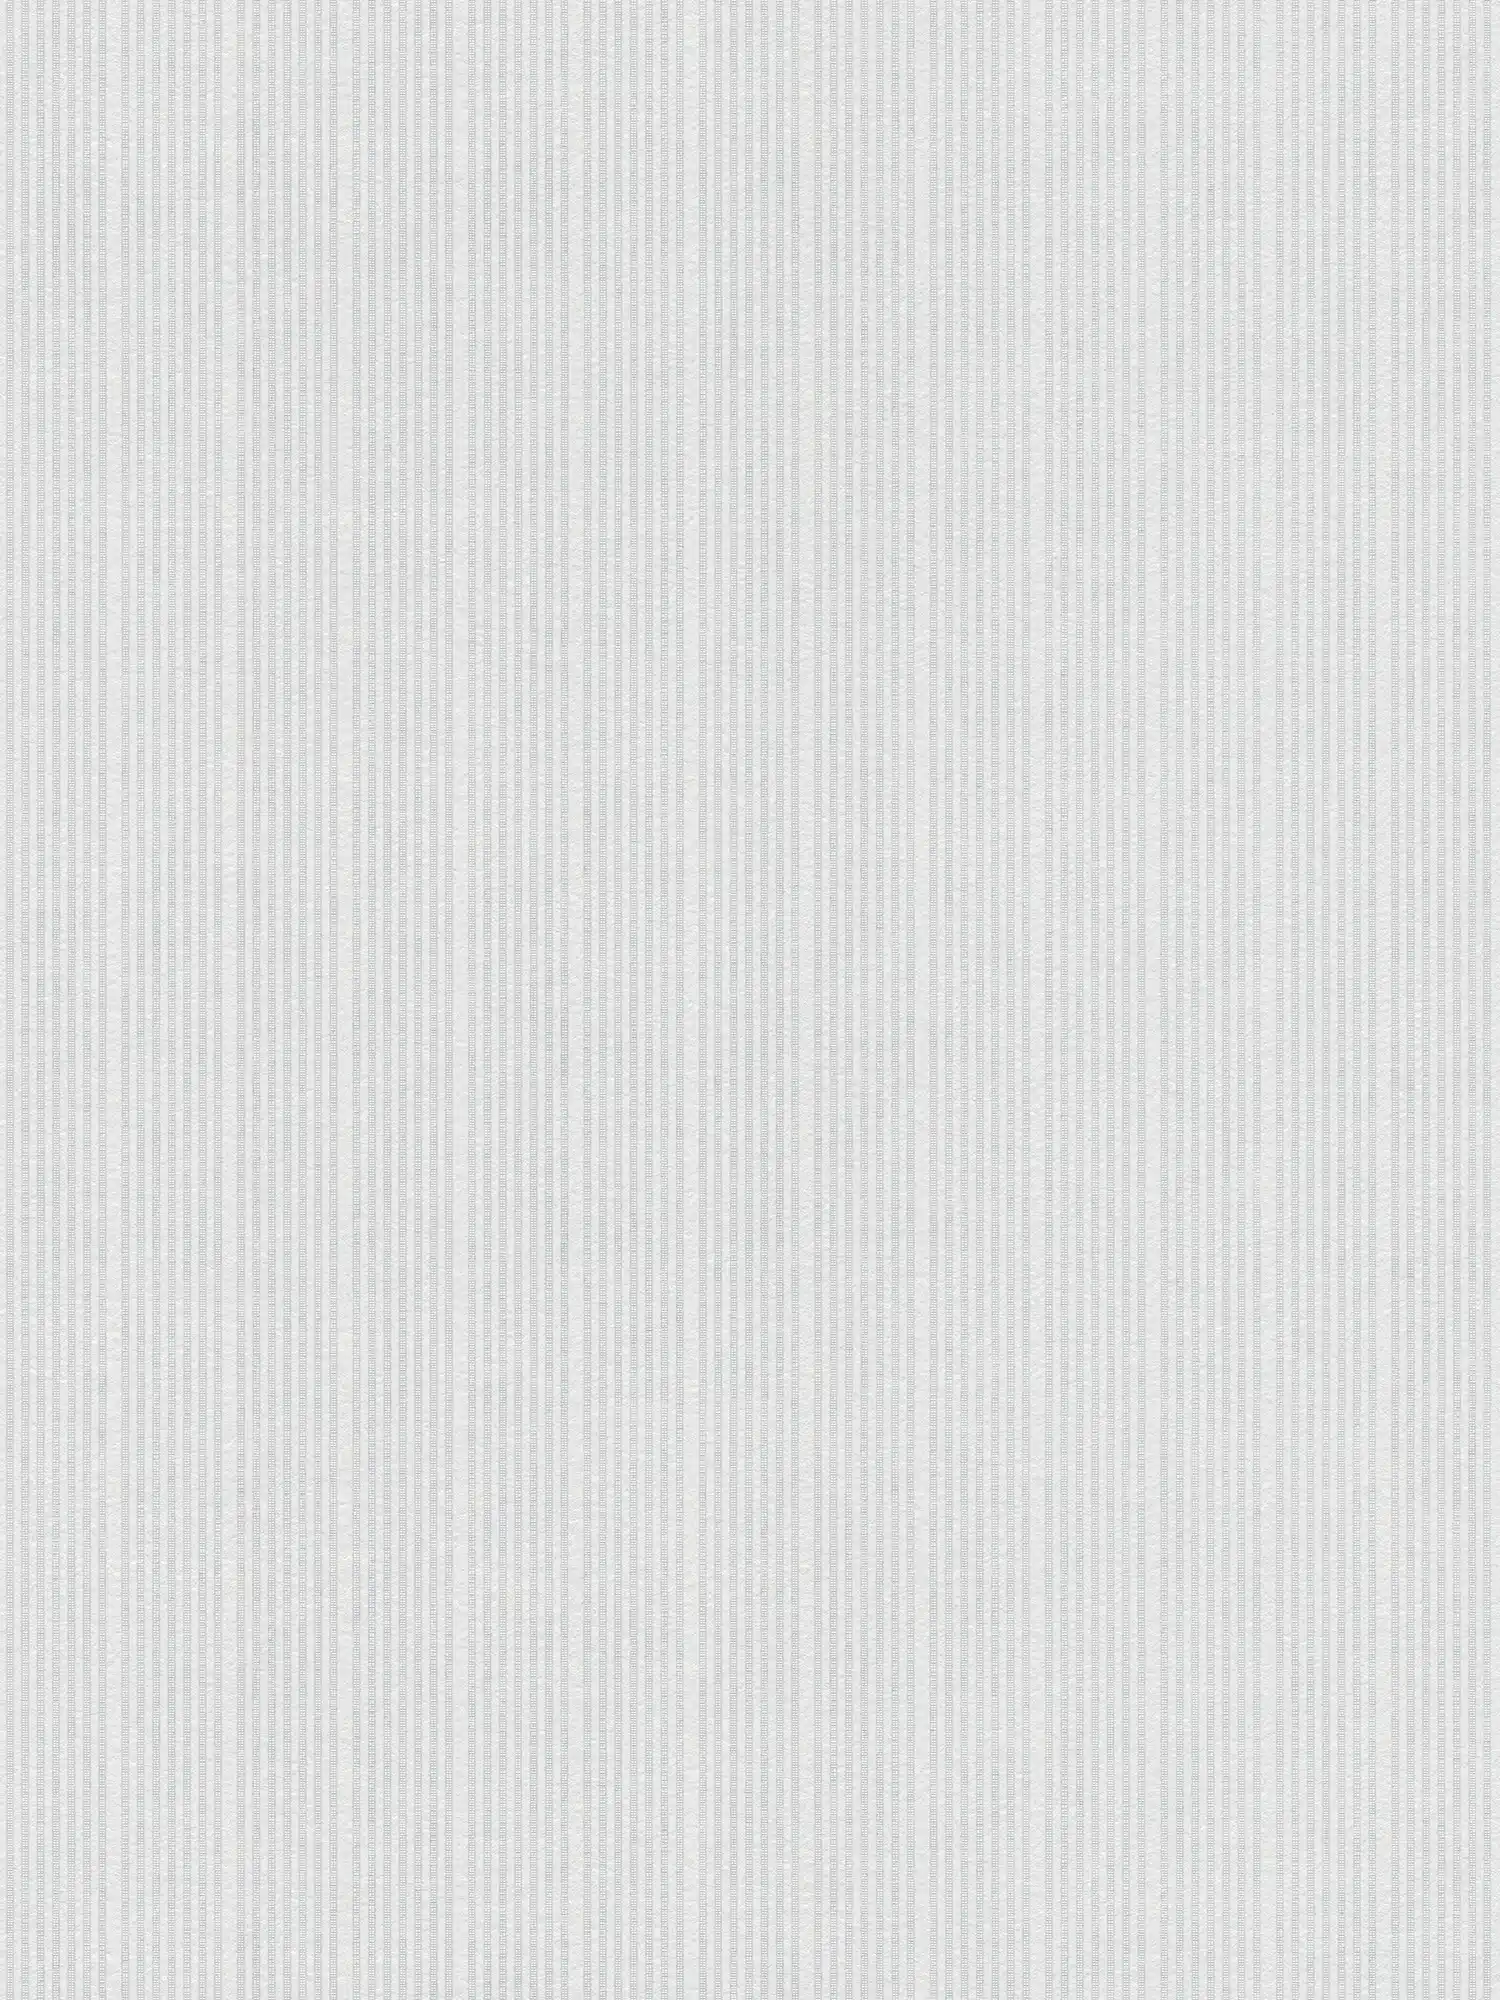 Paintable wallpaper with 3D stripe pattern - white
